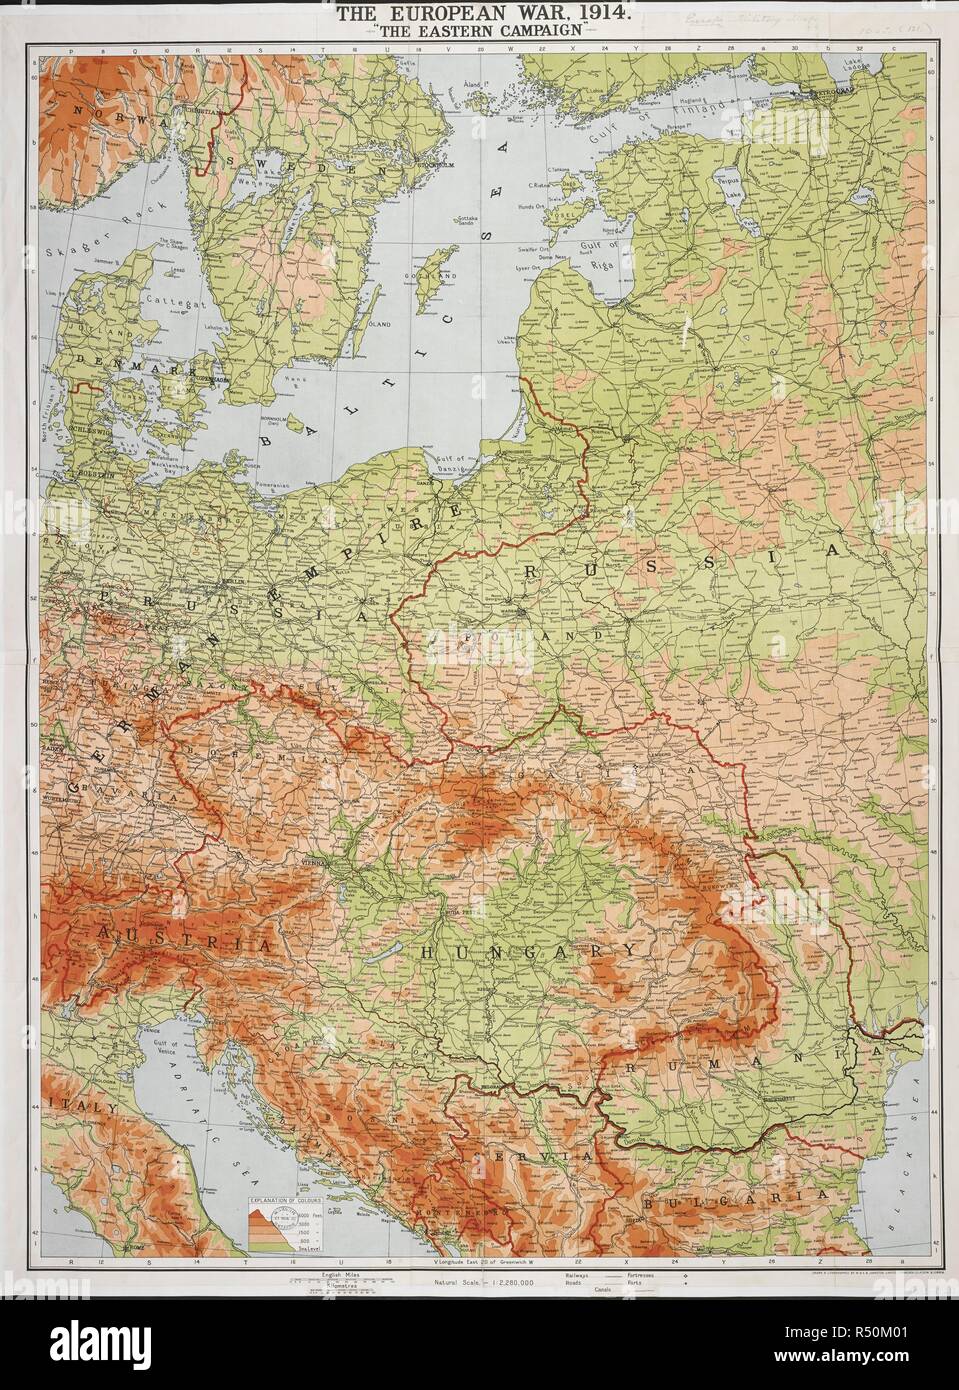 A map of the First World War, showing: Part of Norway and Sweden; Hungary; Austria; Germany; Denmark and Russia. The European War, 1914. â€œThe Eastern Campaign.â€ Natural scale, 1 : 2,280,000. (W. & A.K. Johnston's War Map. Petrograd to Berlin, orographically coloured). Edinburgh : W. & A.K. Johnston, [1915]. Source: Maps.1035.(121). Stock Photo